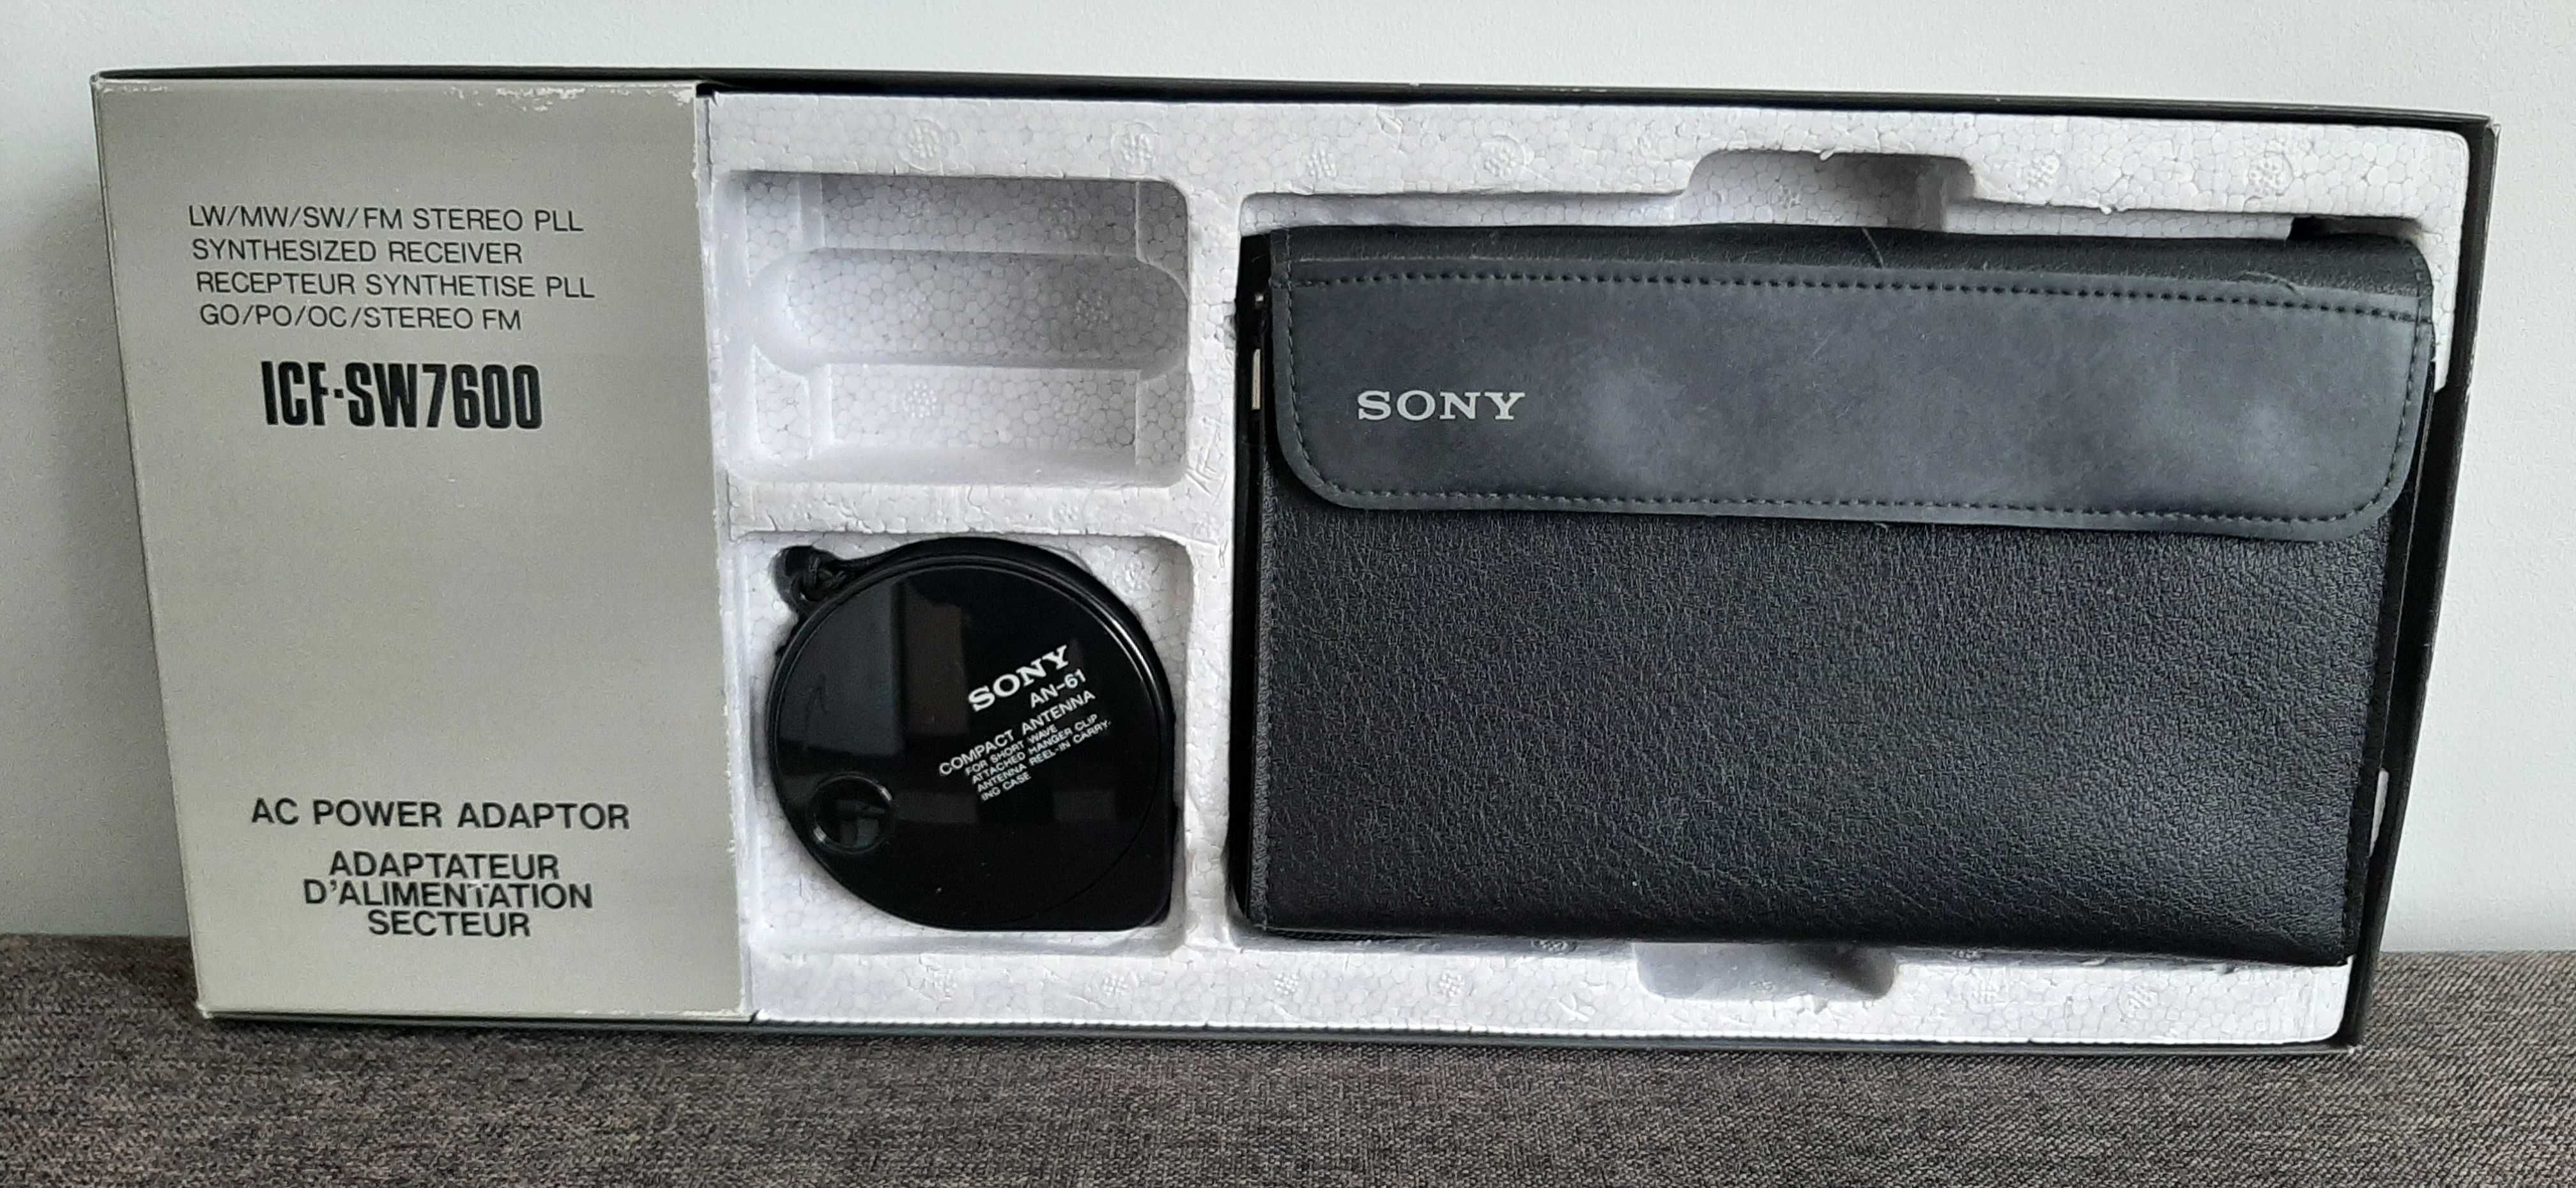 Sony ISF - SW7600